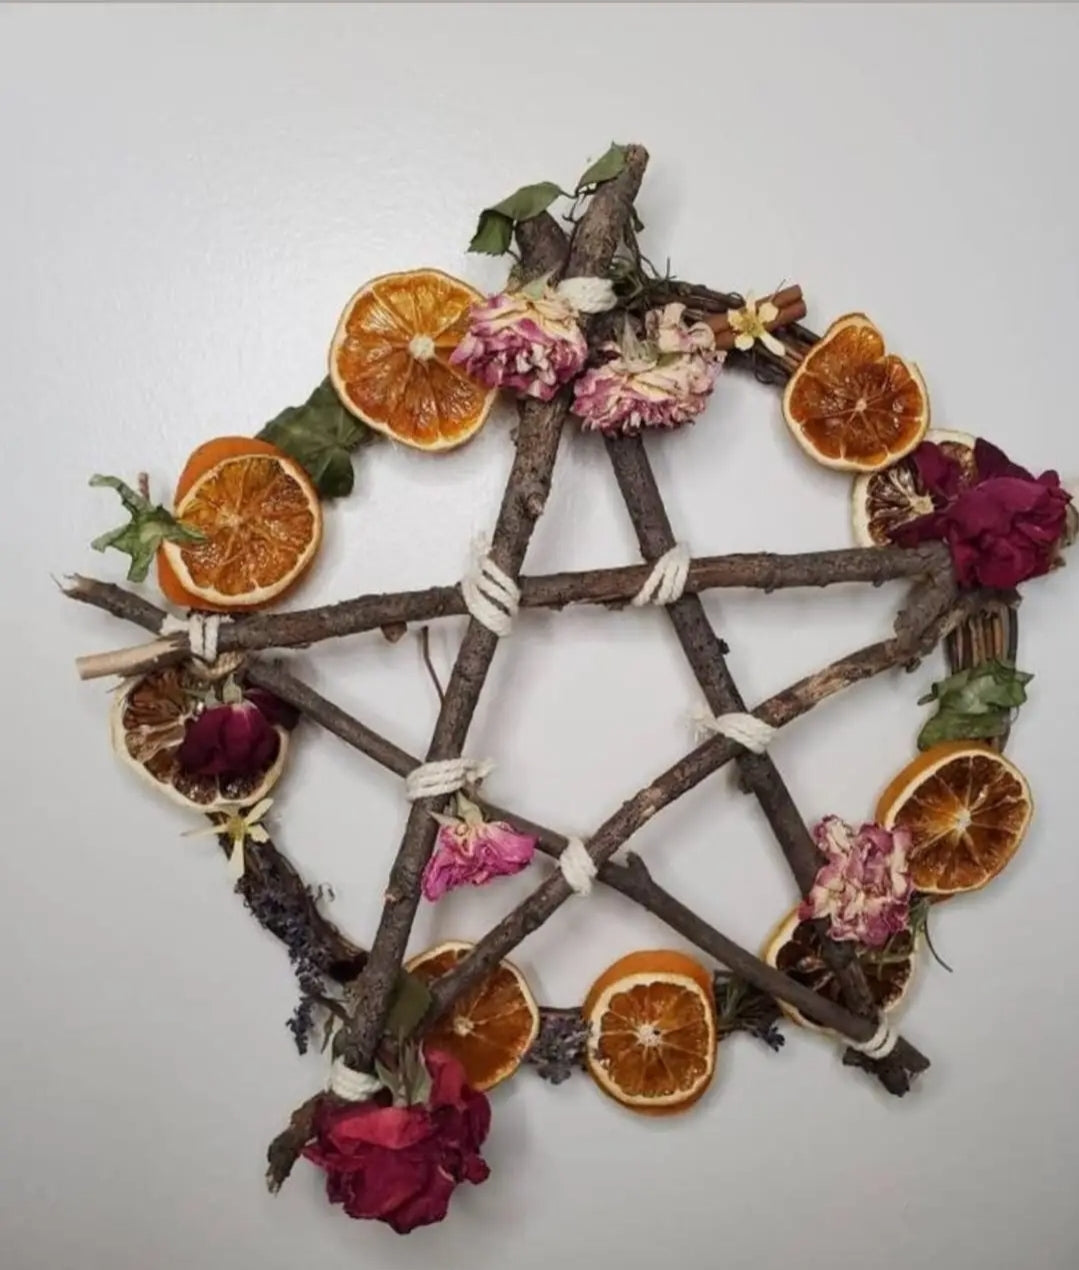 SOLD OUT - 03/16/24 Event Ticket - Spring Equinox / Ostara Pentacle Wreath Class 3pm